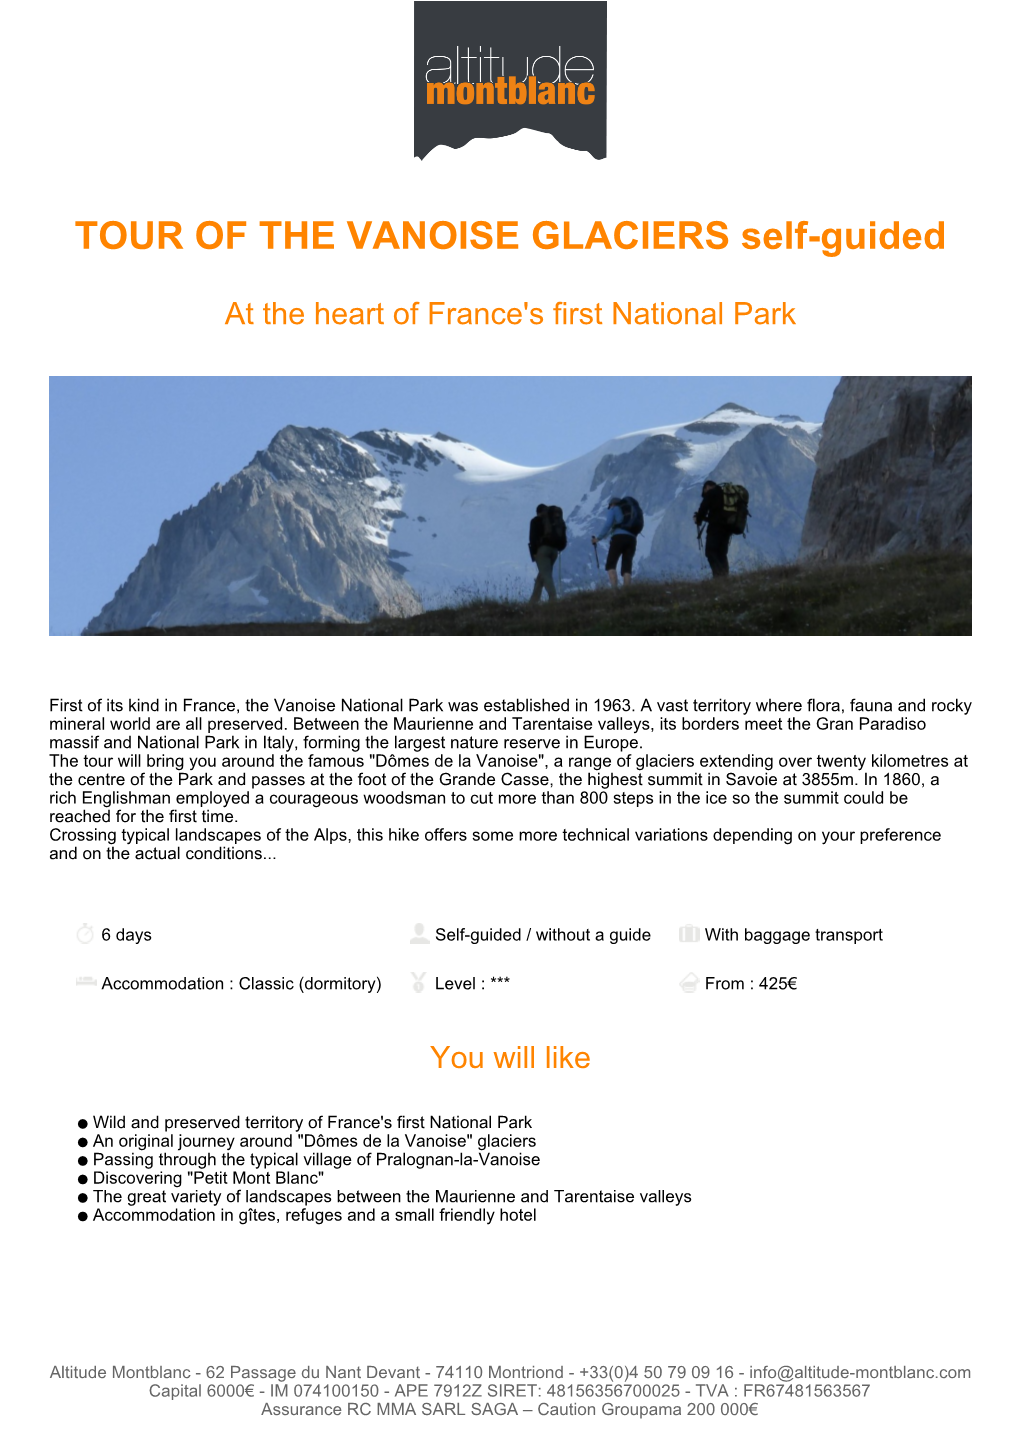 TOUR of the VANOISE GLACIERS Self-Guided